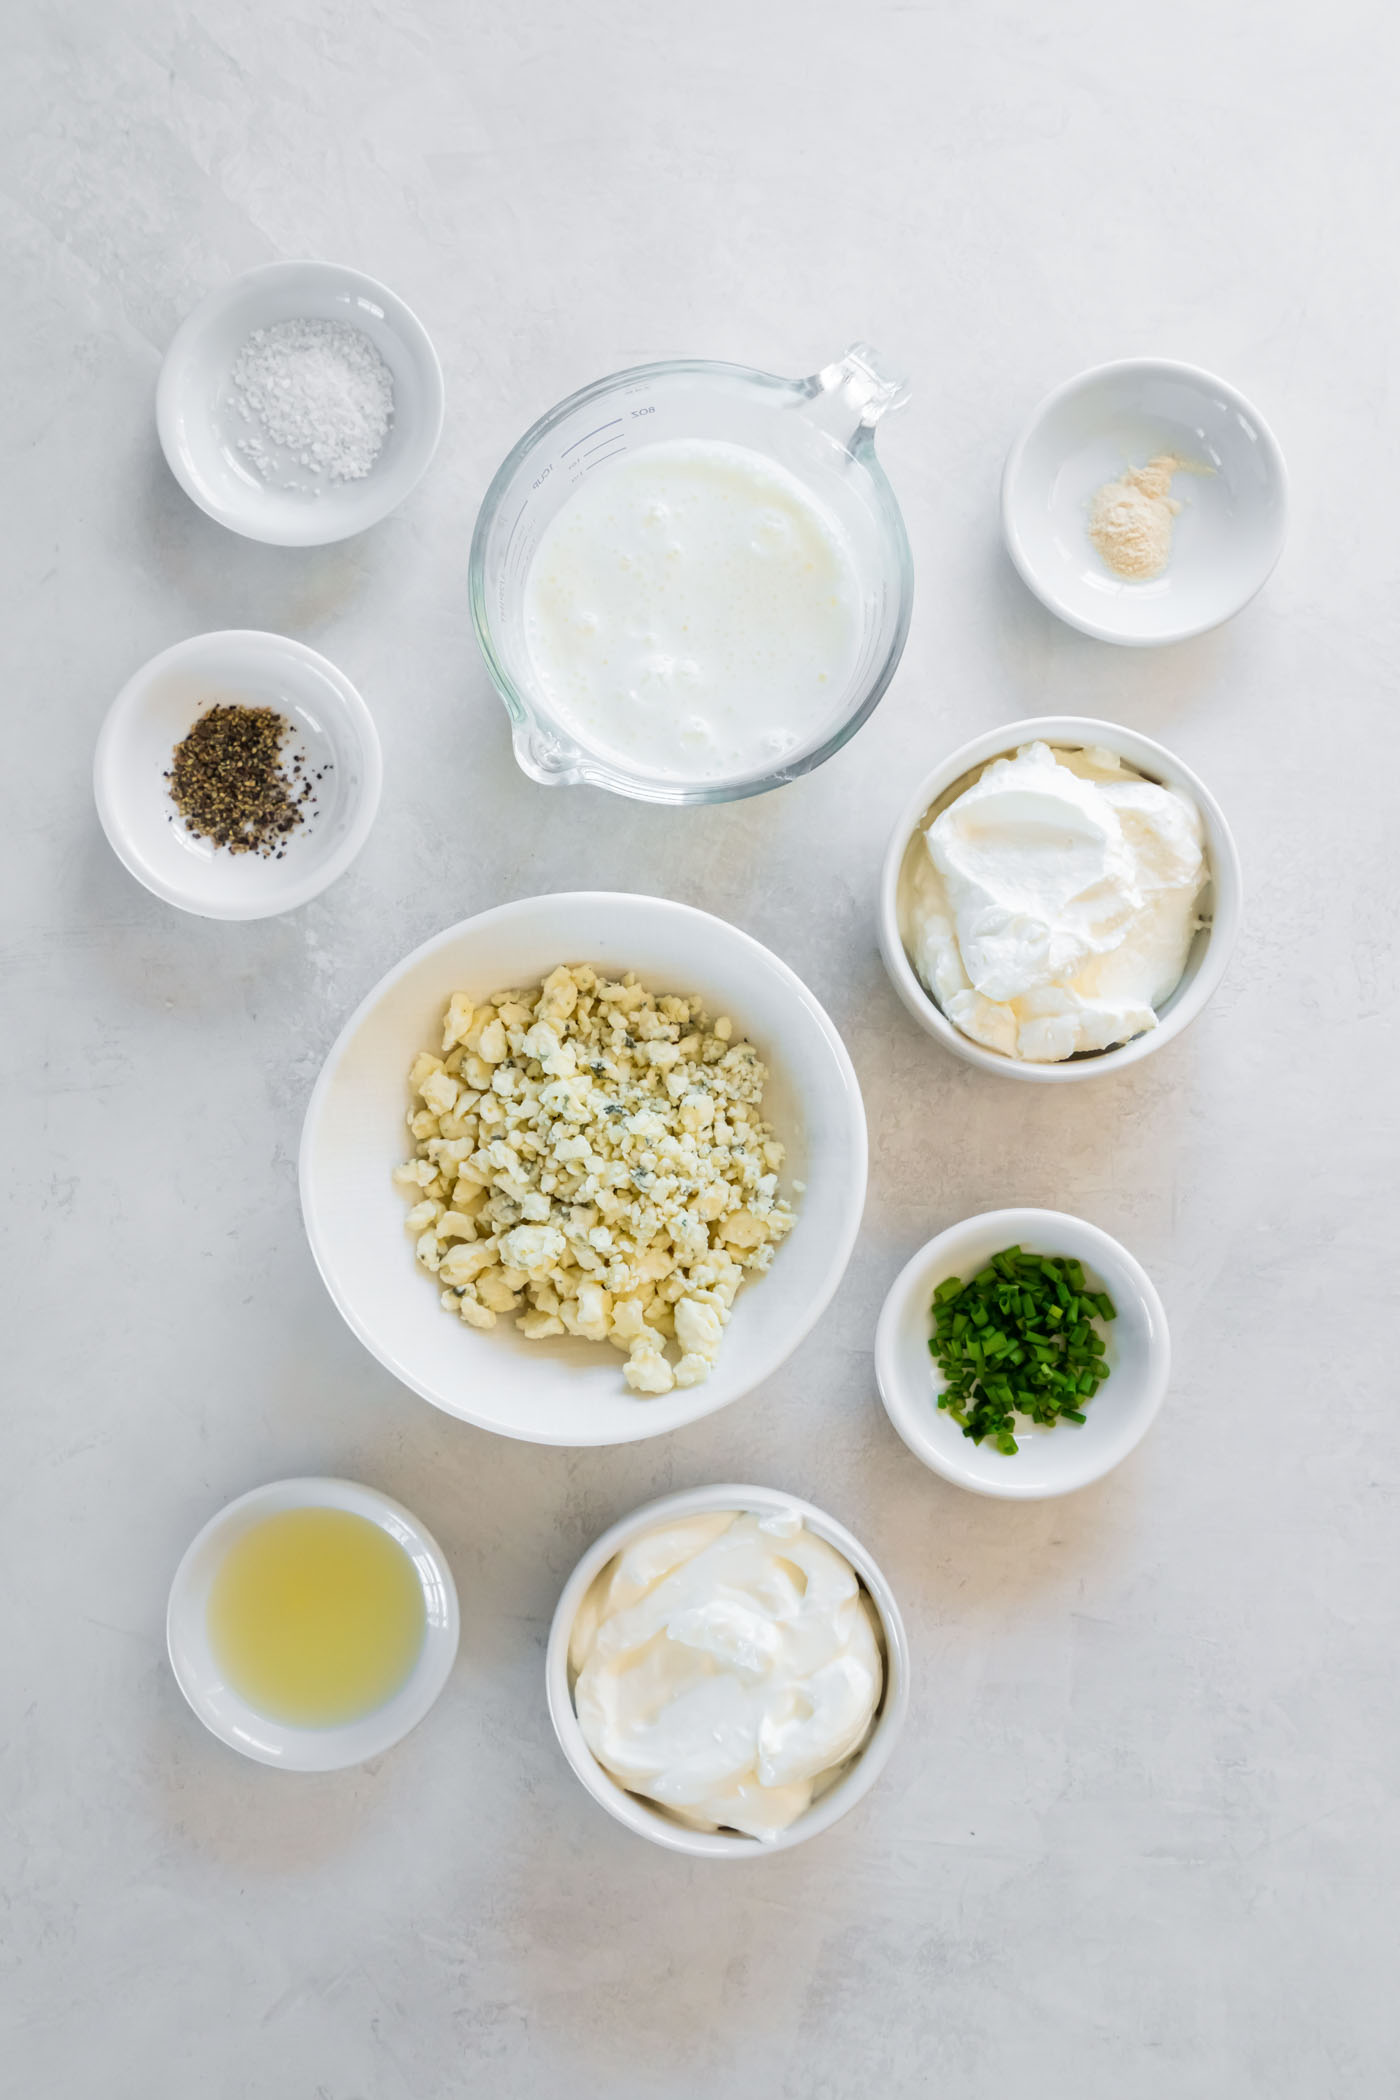 Ingredients for blue cheese dressing recipe.